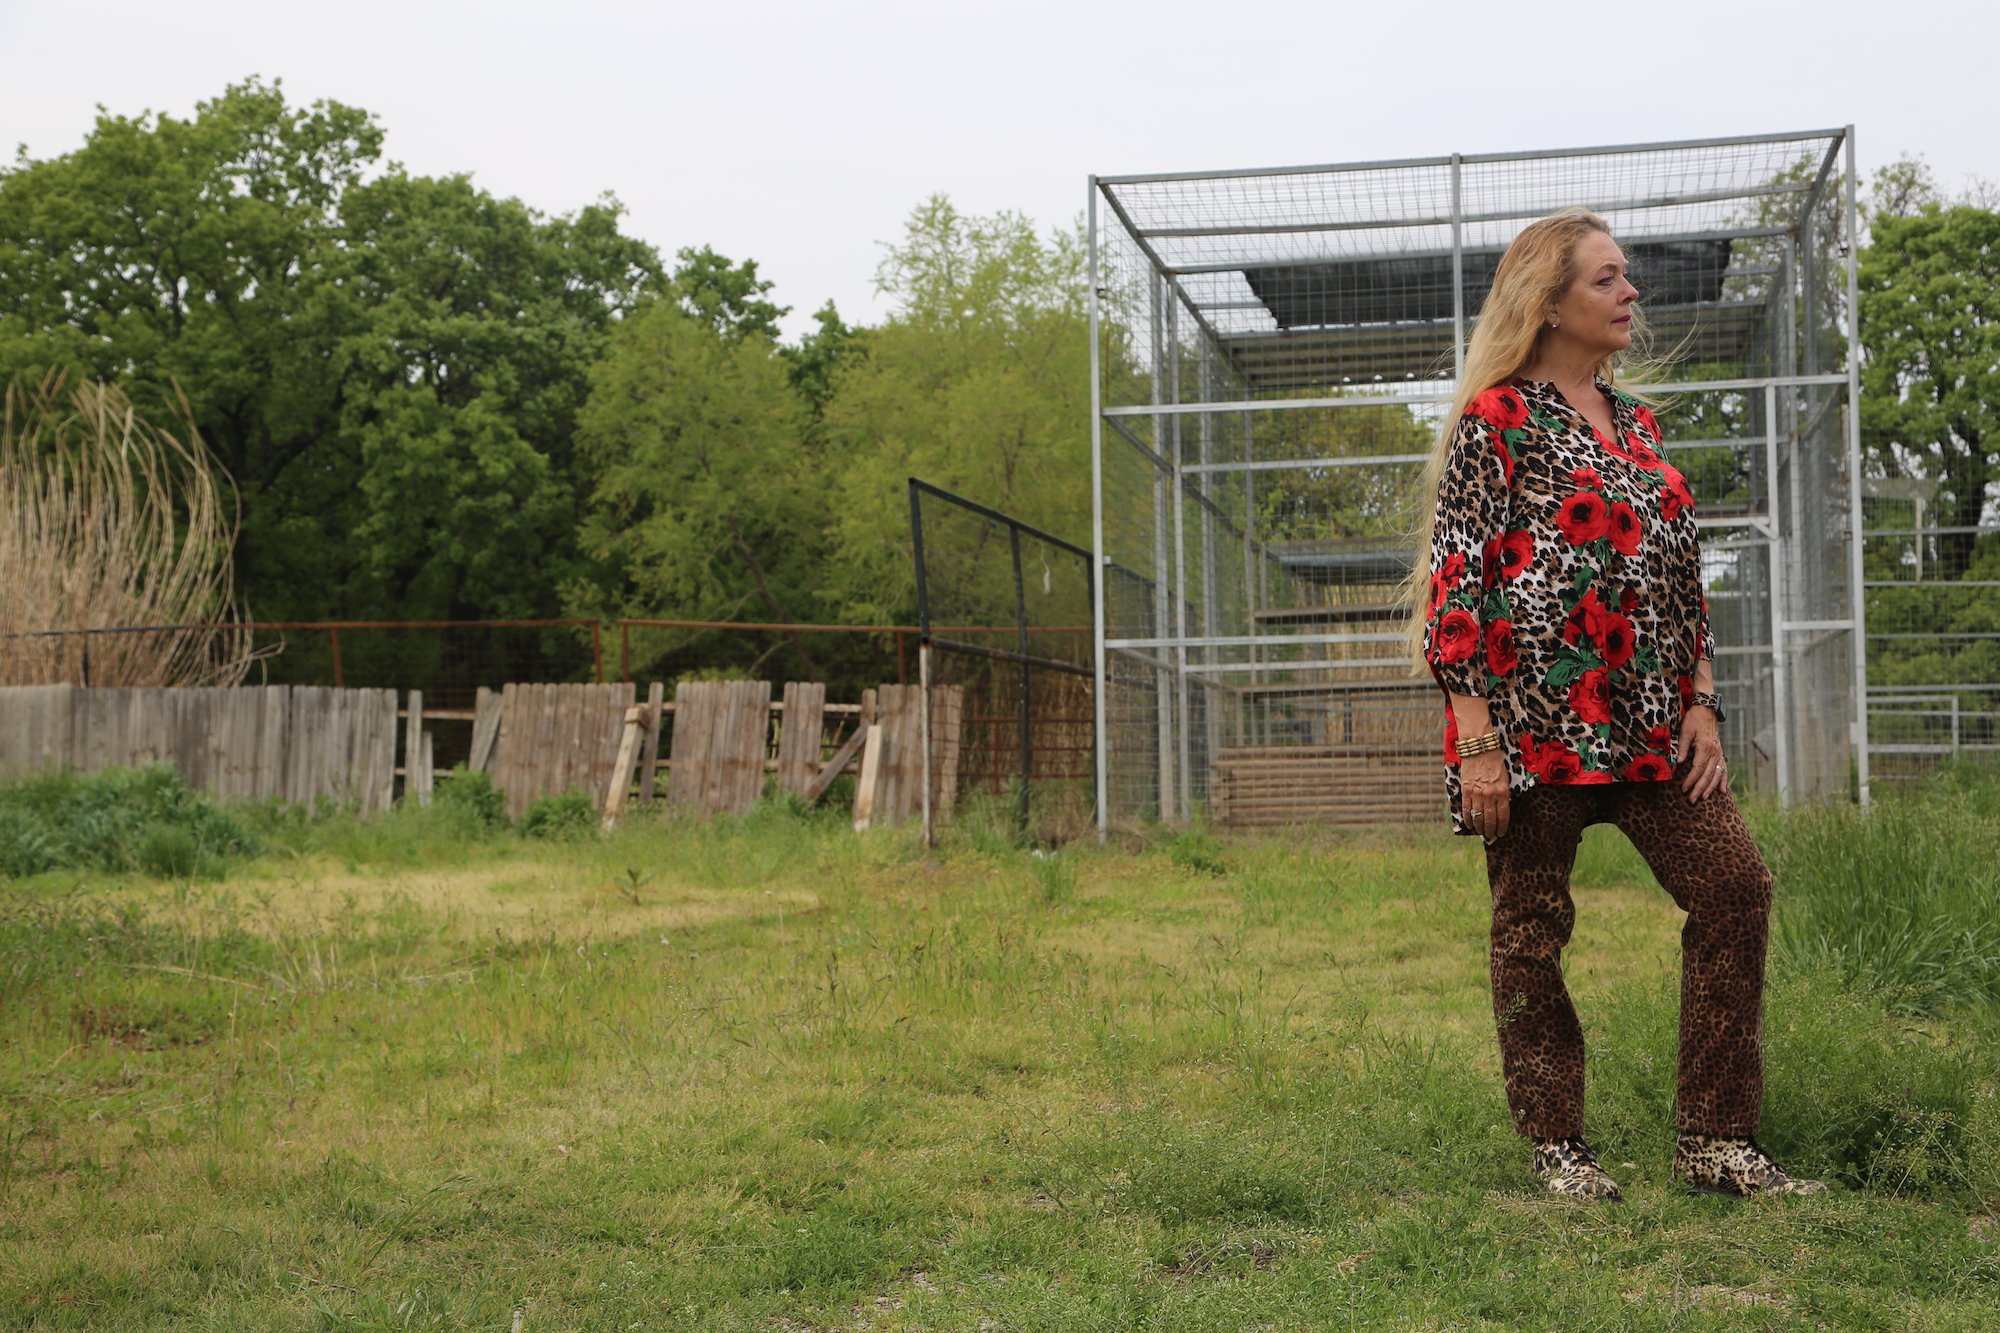 Carole Baskin stands on the grounds of 'Tiger King's G.W. Zoo